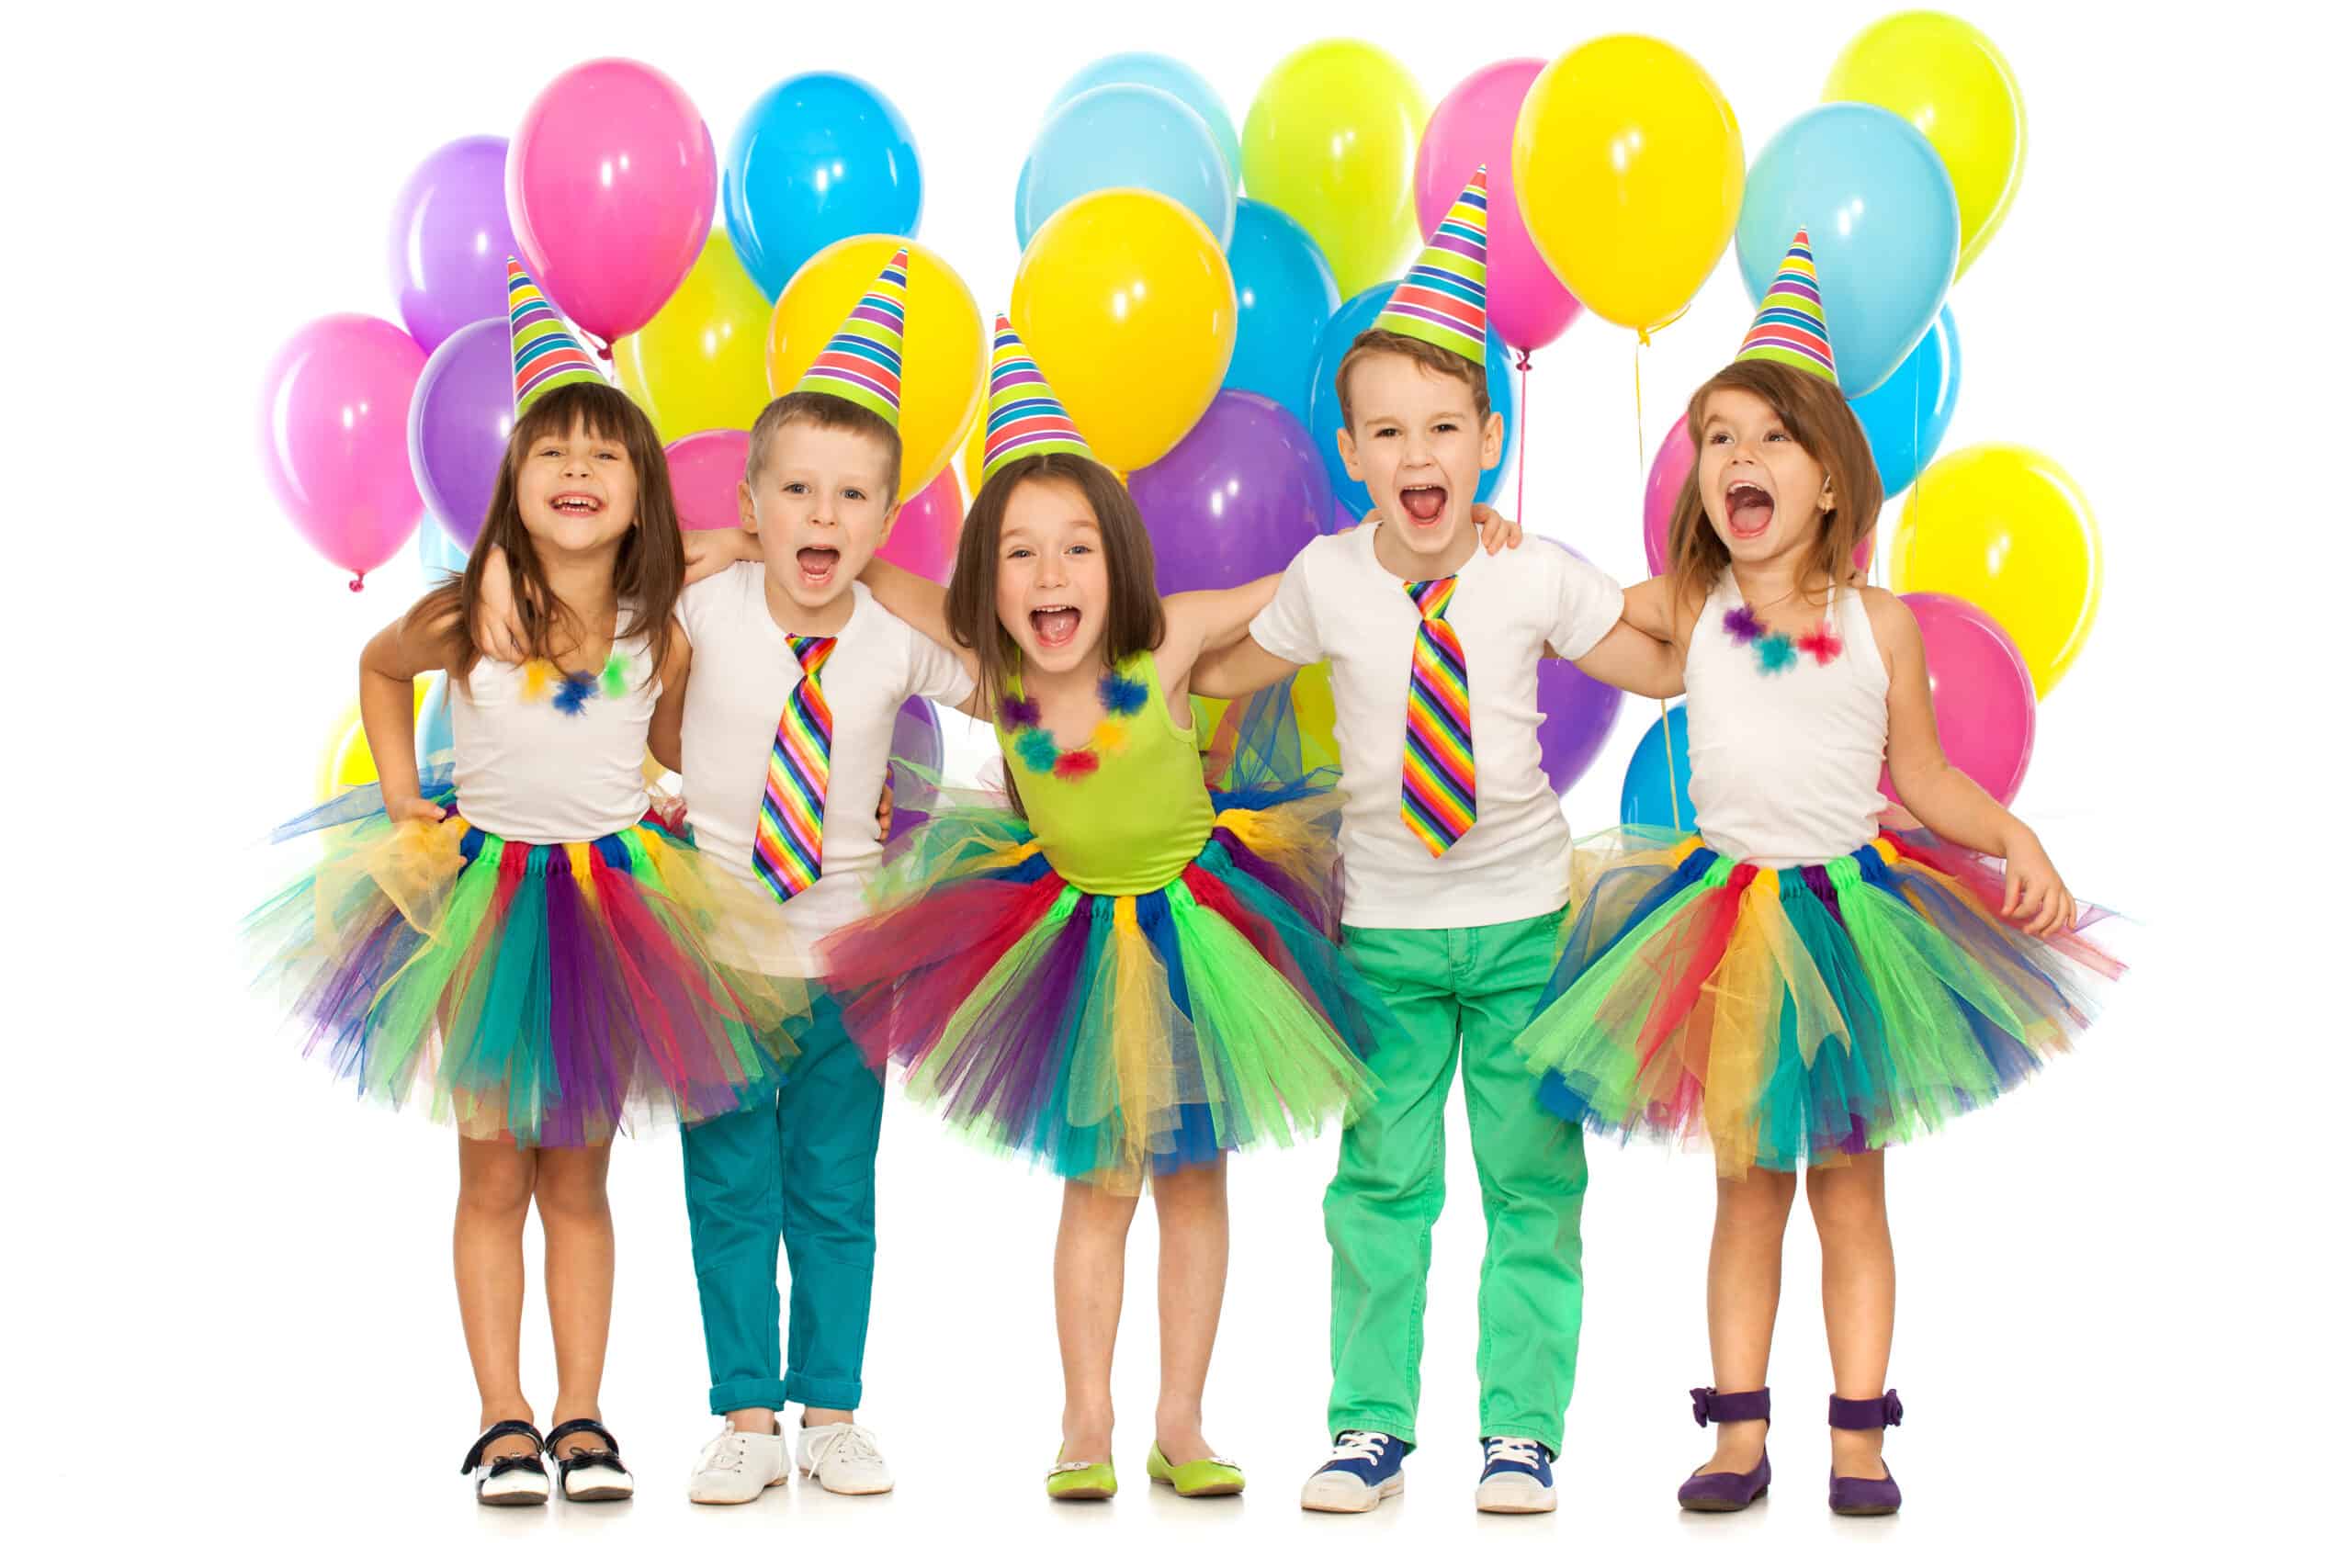 children with balloons for a birthday